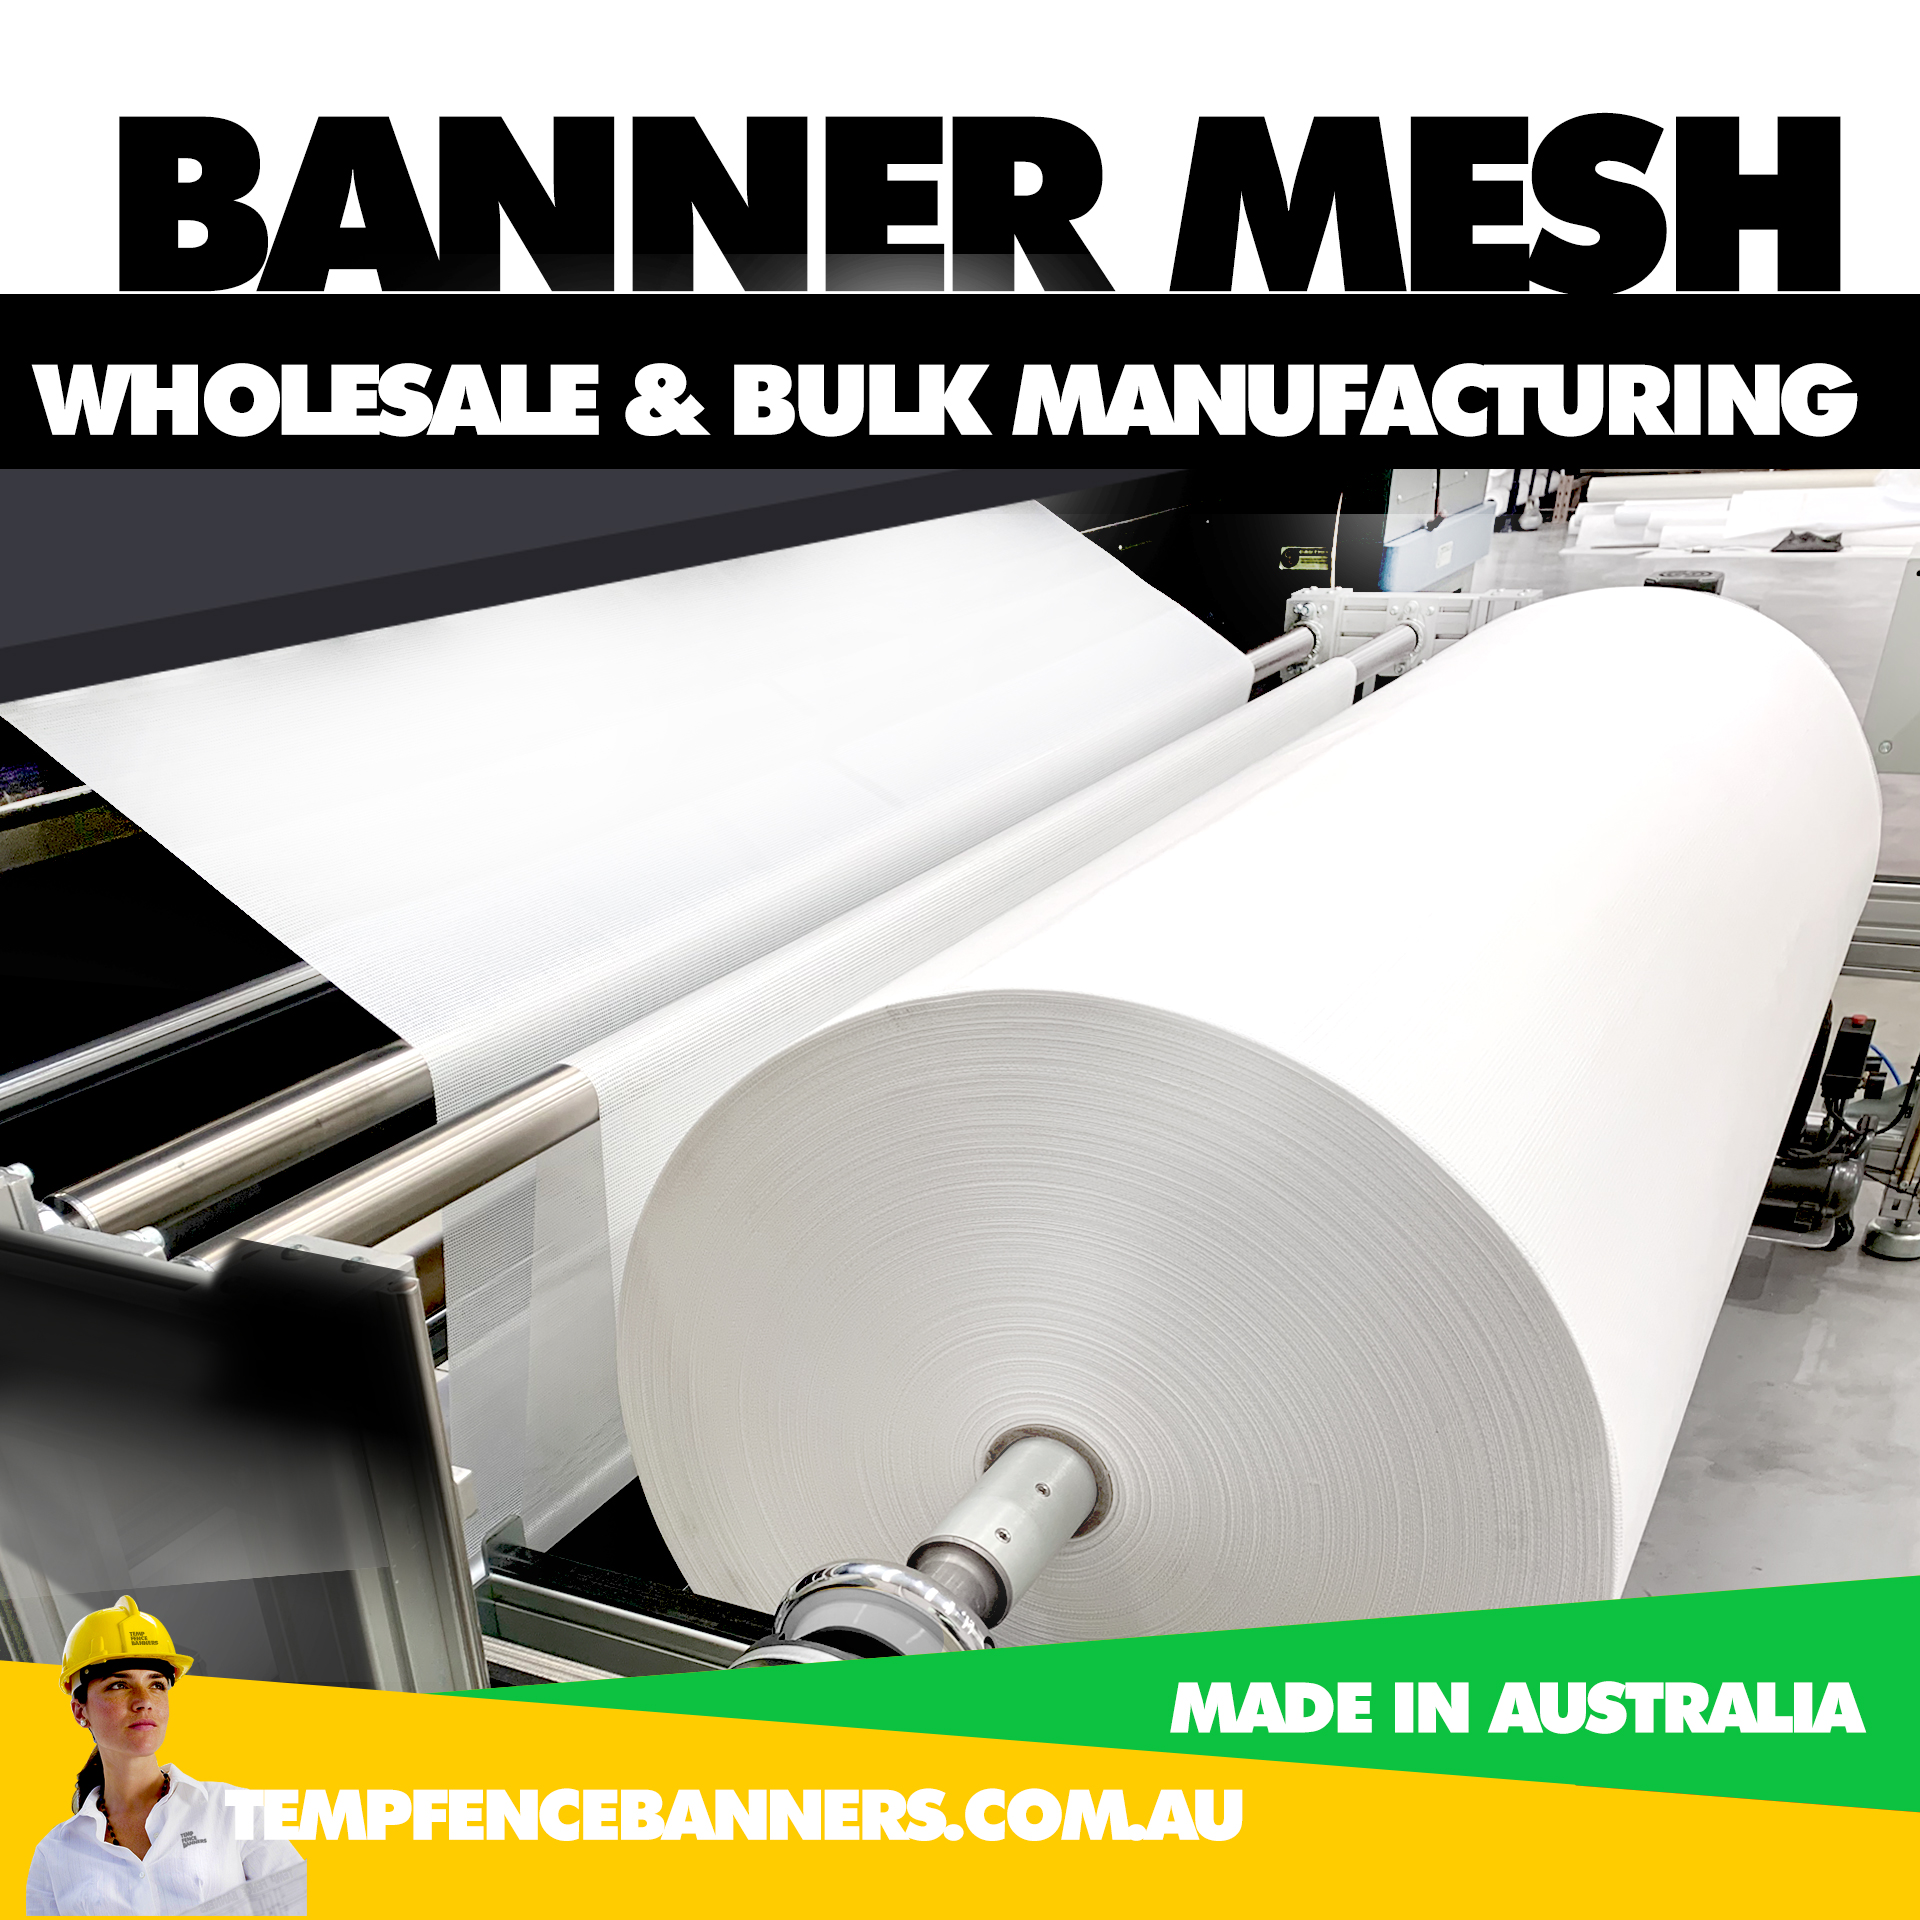 Temp Fence Banners factory provide trade buyers with mesh ream printing services and wide banner mesh materials such as 1.8 meter wide print. Wholesale and Bulk Manufacturing in Australia.